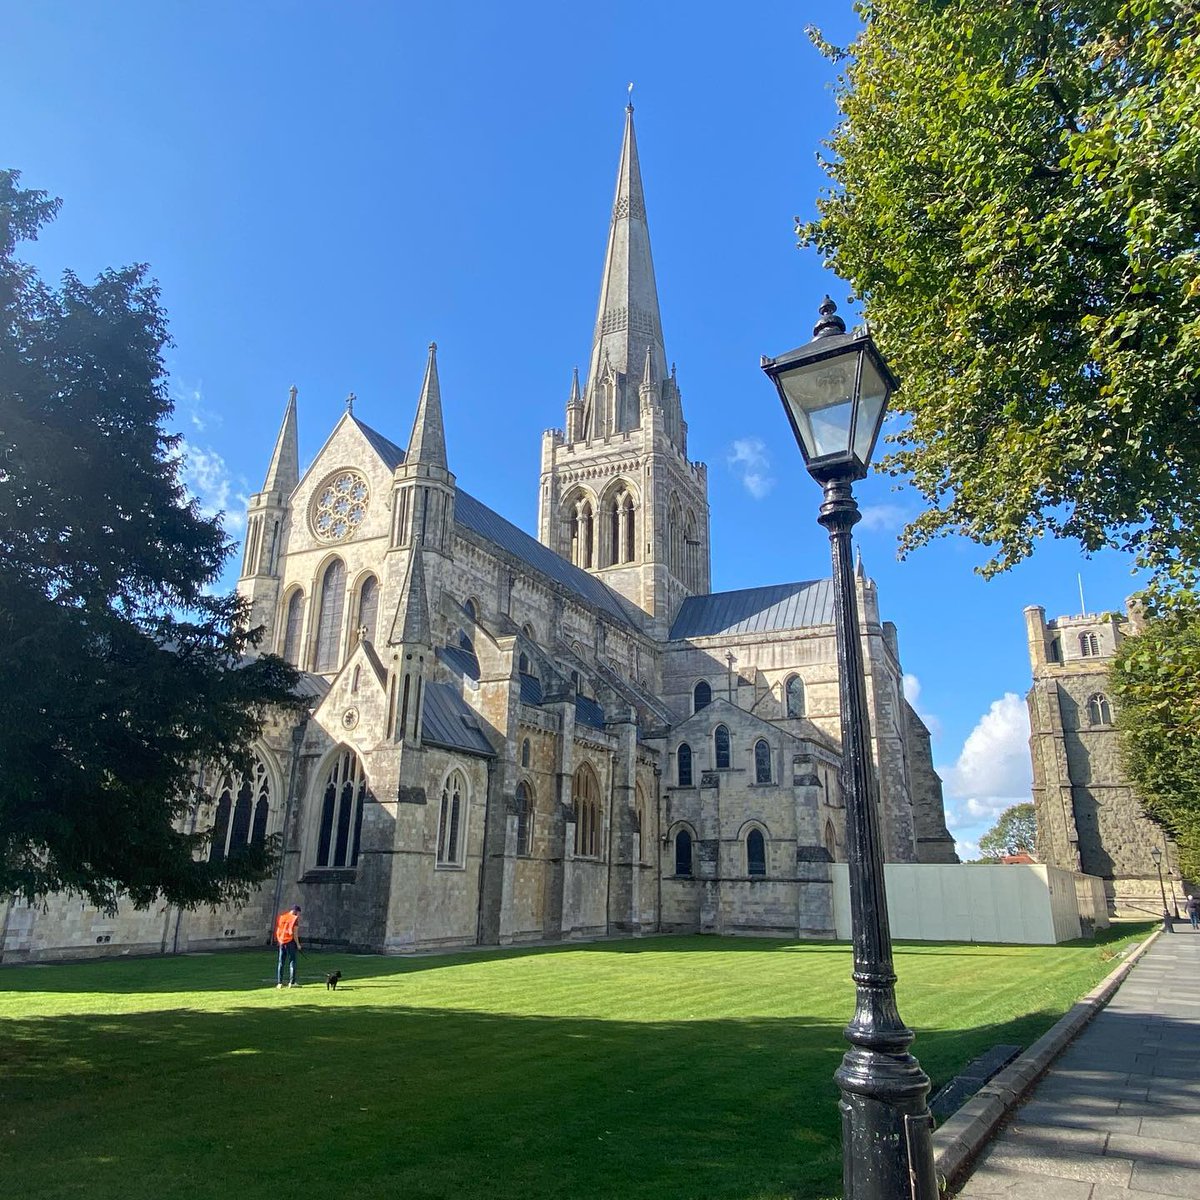 Doesn’t the cathedral look splendid today? Happy October everyone! 

#chichester #chichestercathedral 

#visituk #loveengland #loveuk #lovegreatbritain #explore_britain #mybritain #uk_greatshots 
#chichesteronline 
#wearechichester #lovechichester: zpr.io/HhXT8